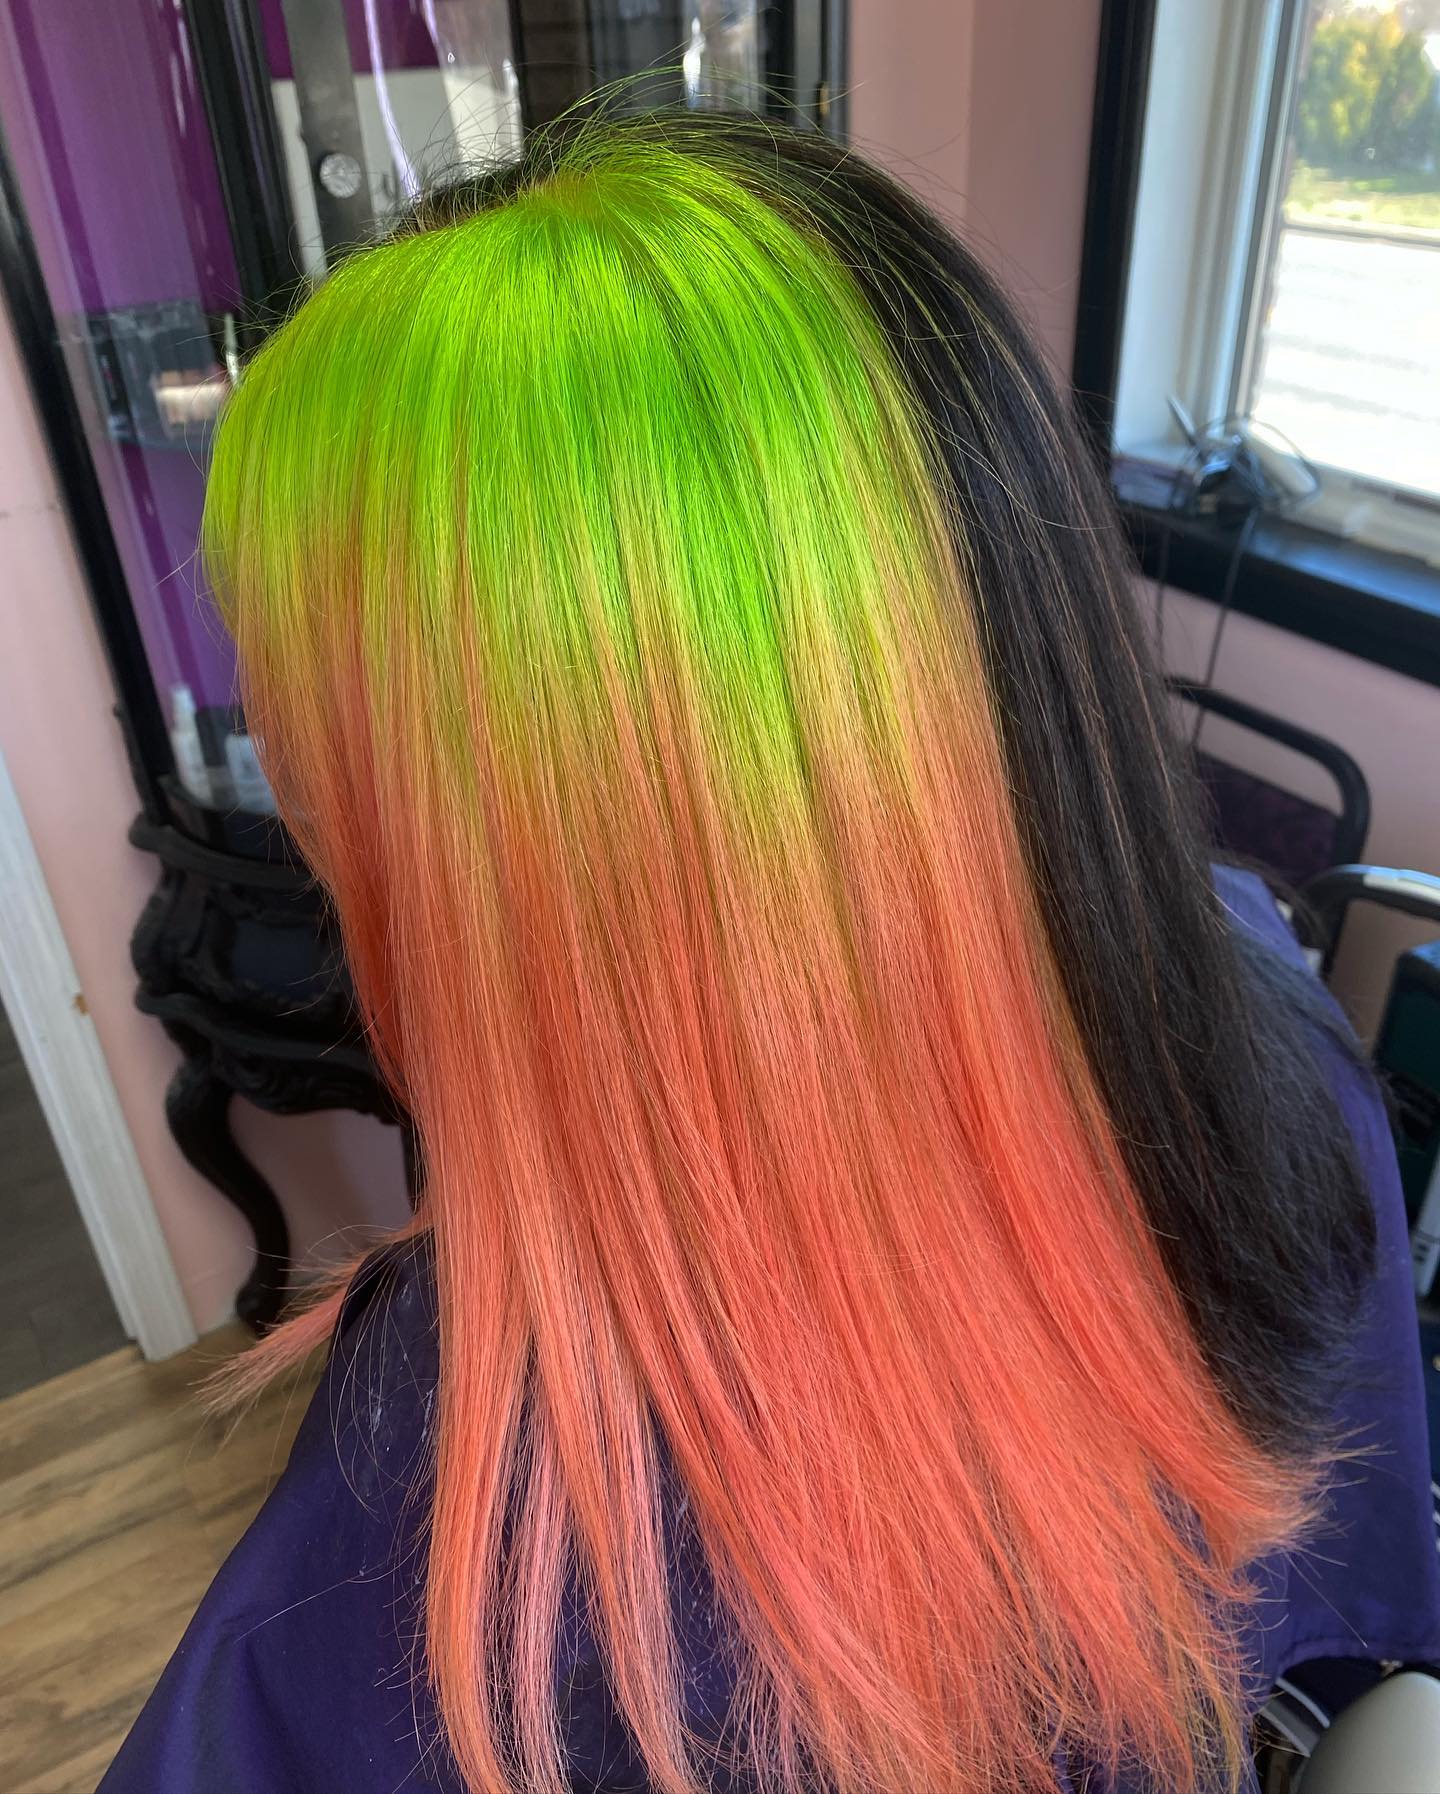 pink and green ombre hair